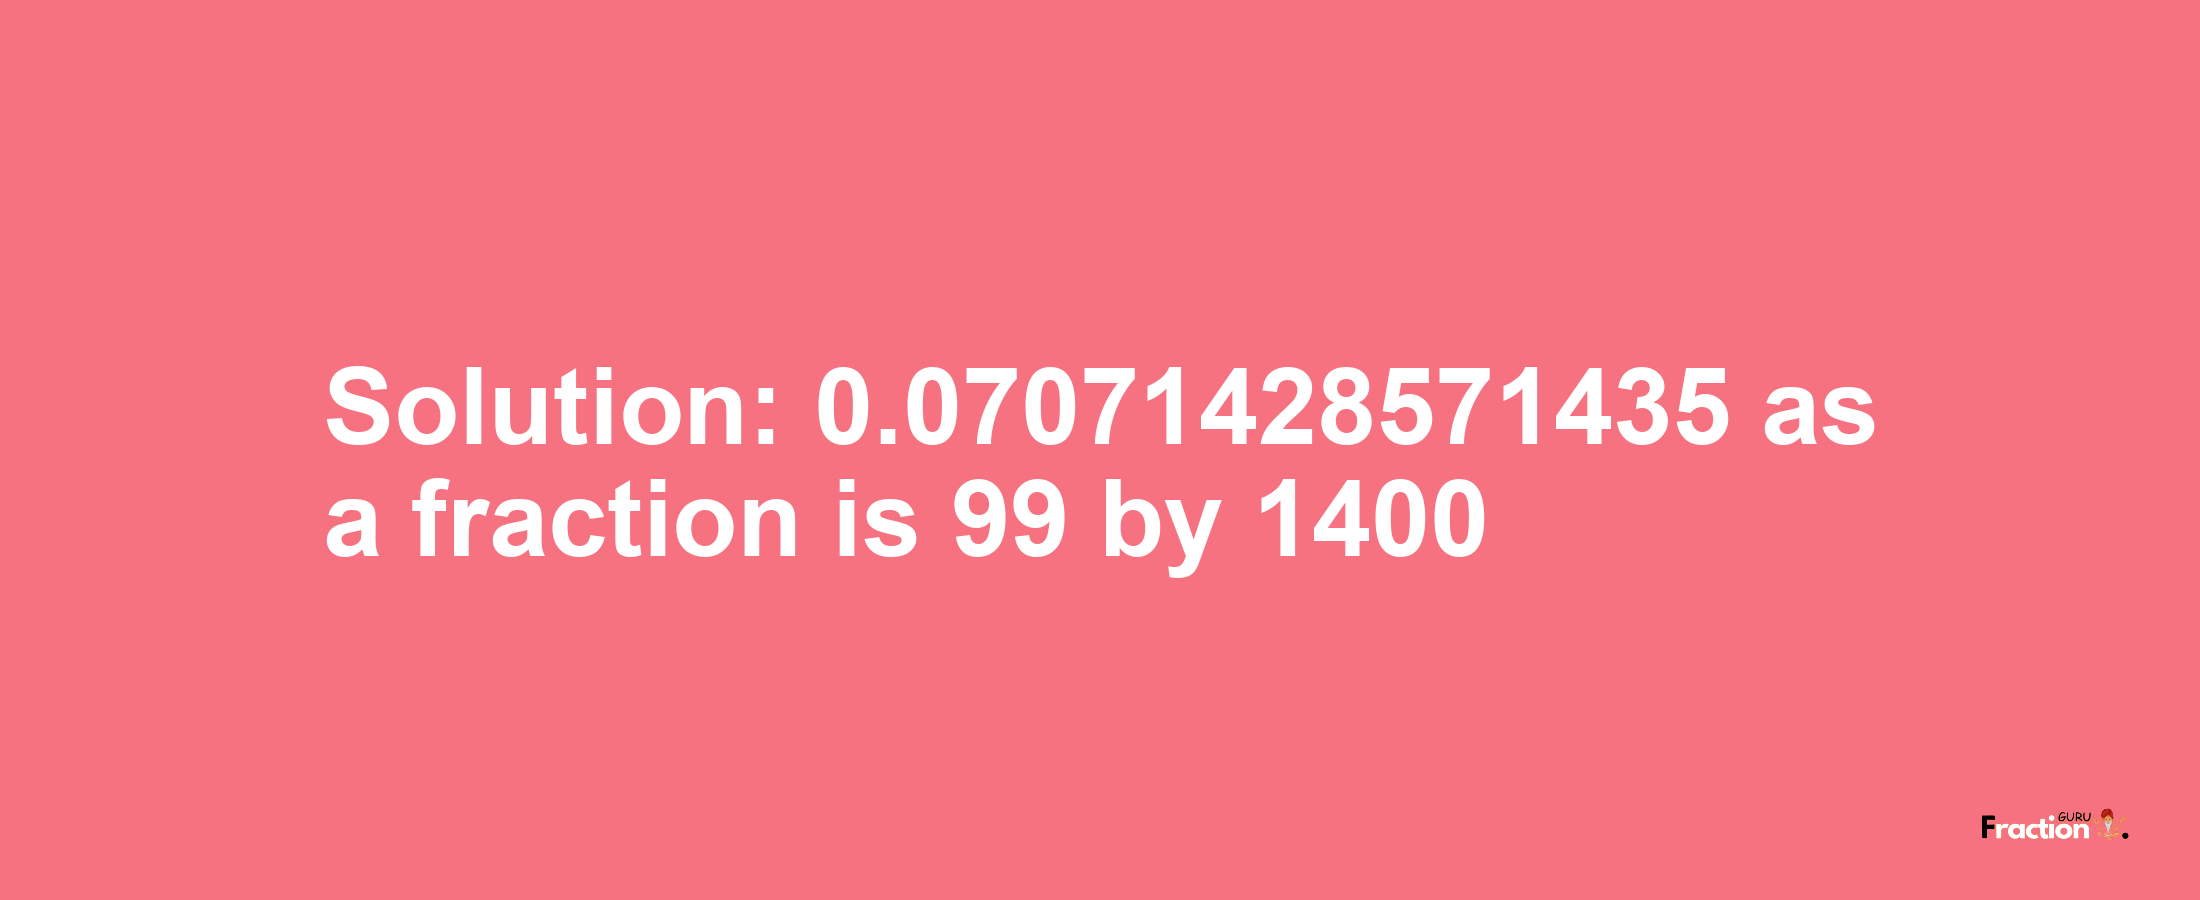 Solution:0.07071428571435 as a fraction is 99/1400